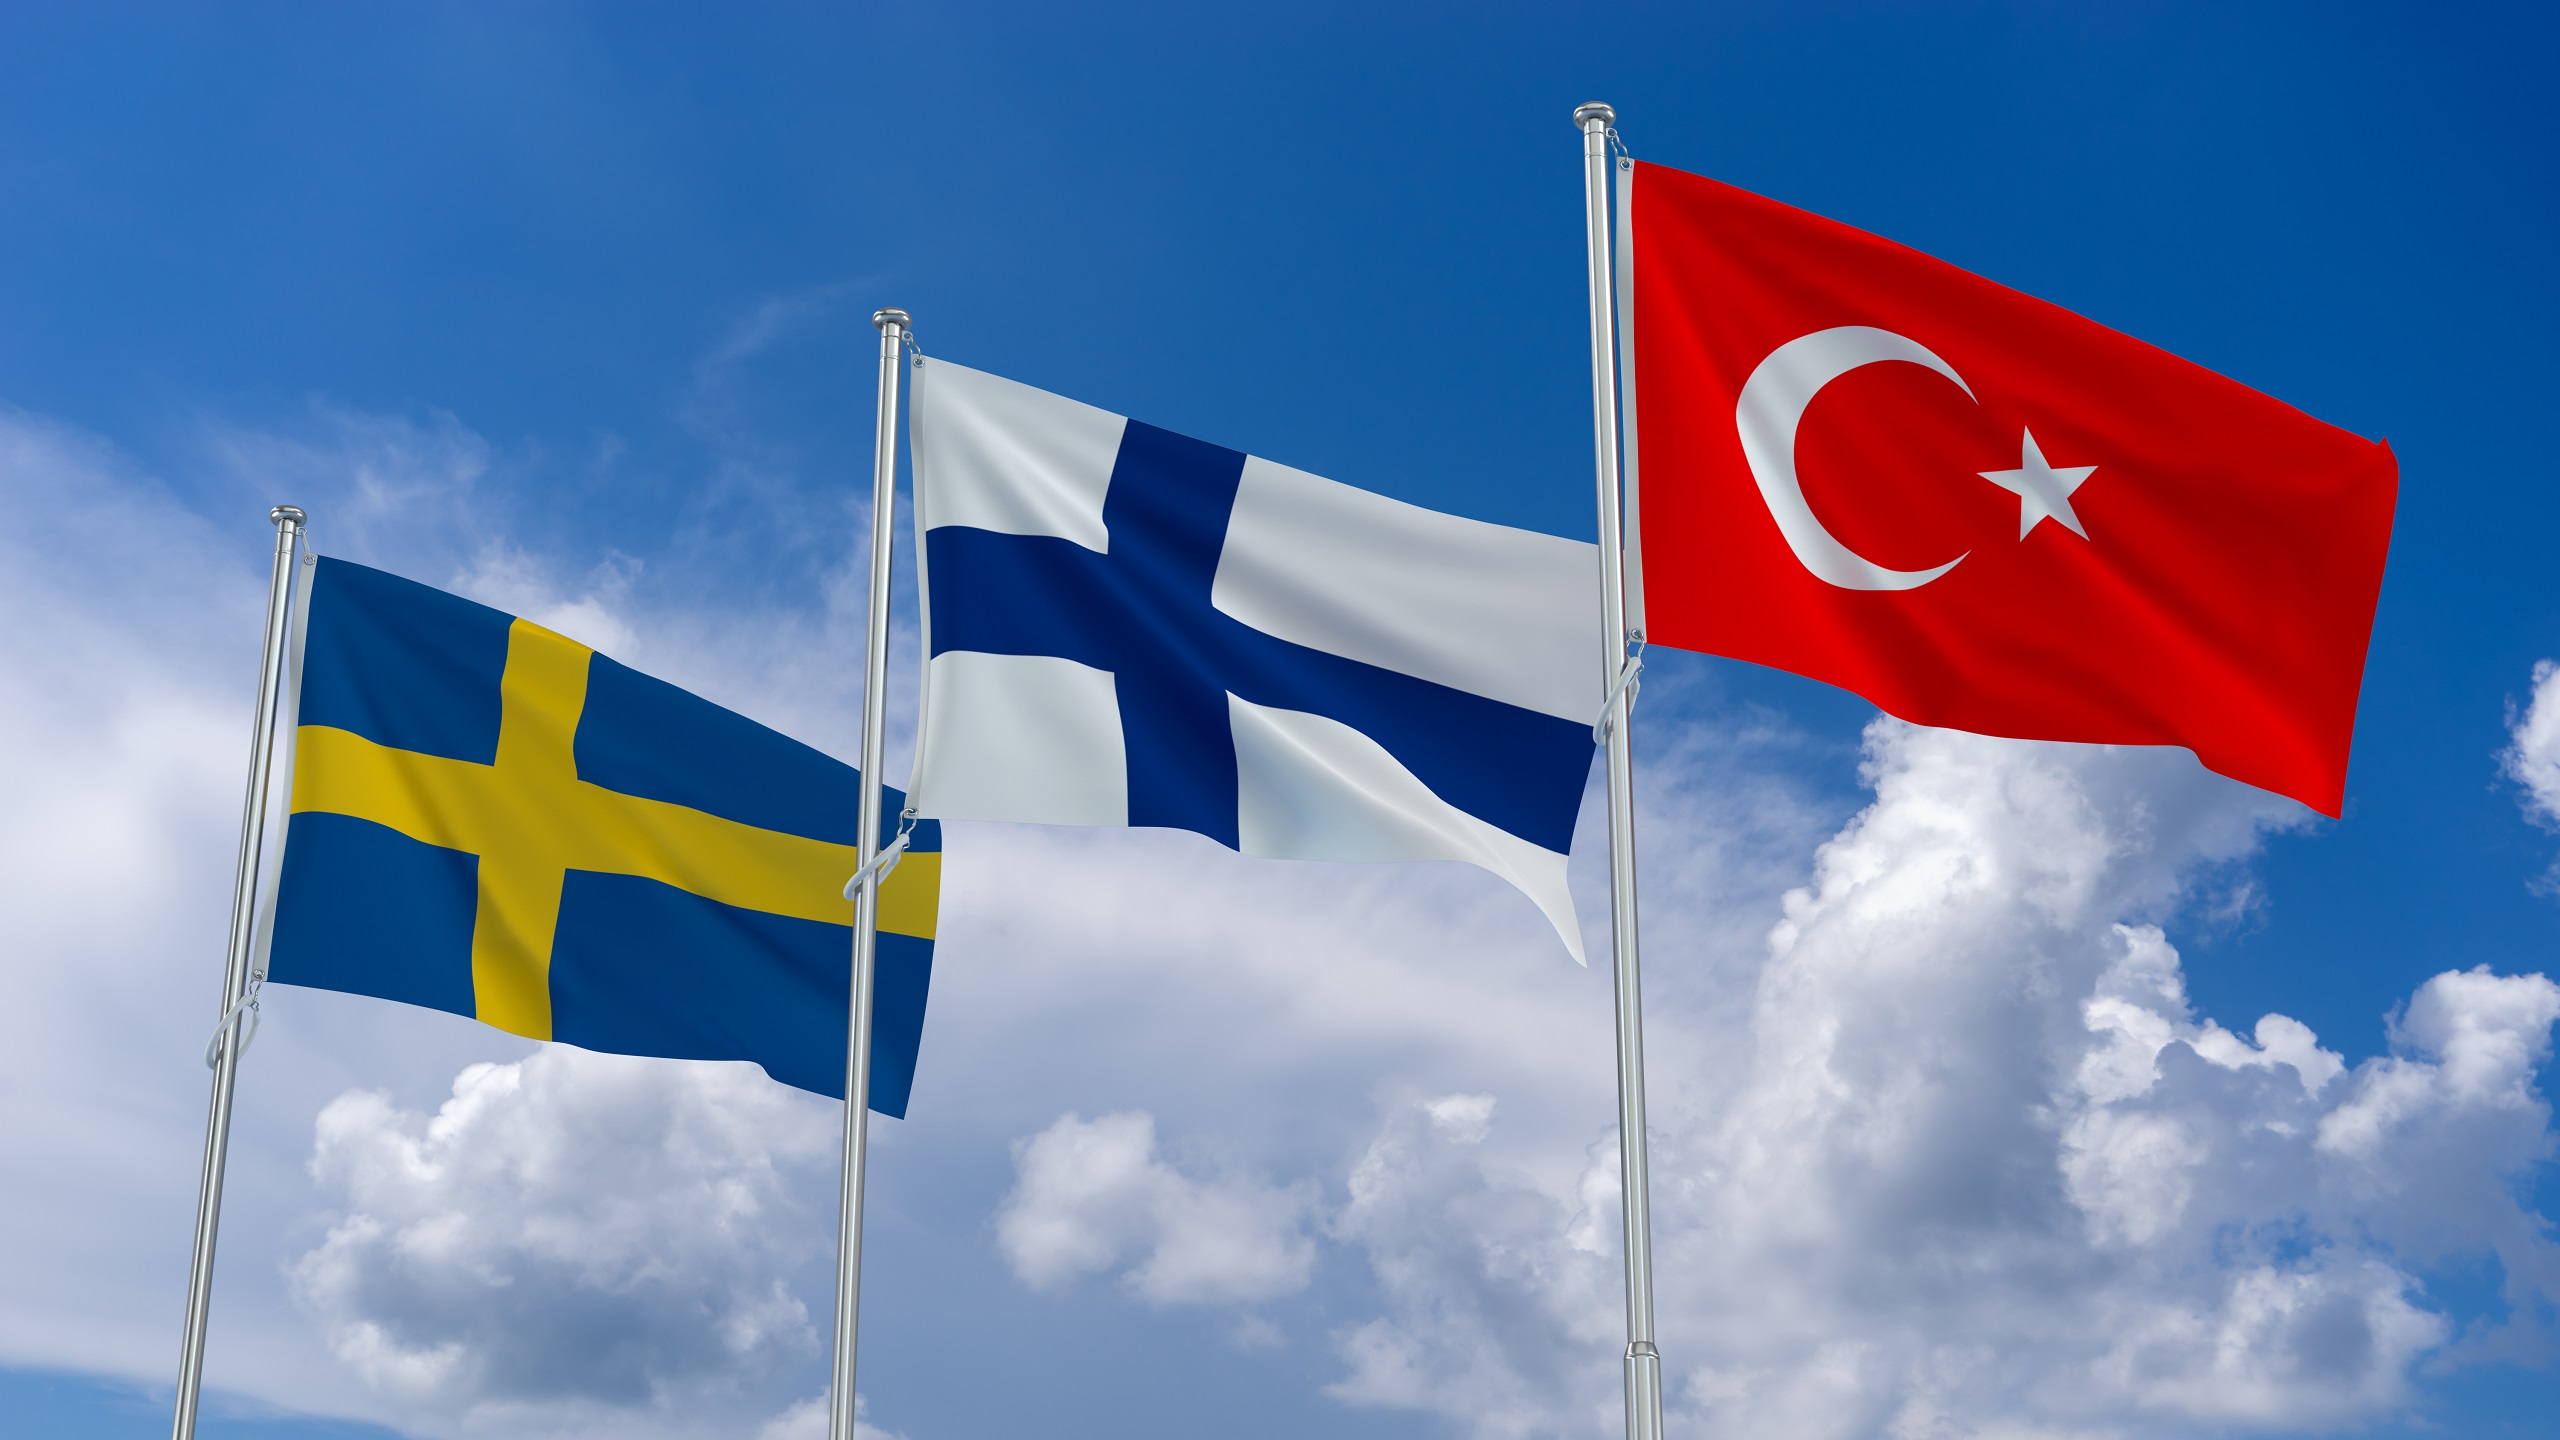 Turkey Could Evaluate Finland’s NATO Bid Separate From Sweden